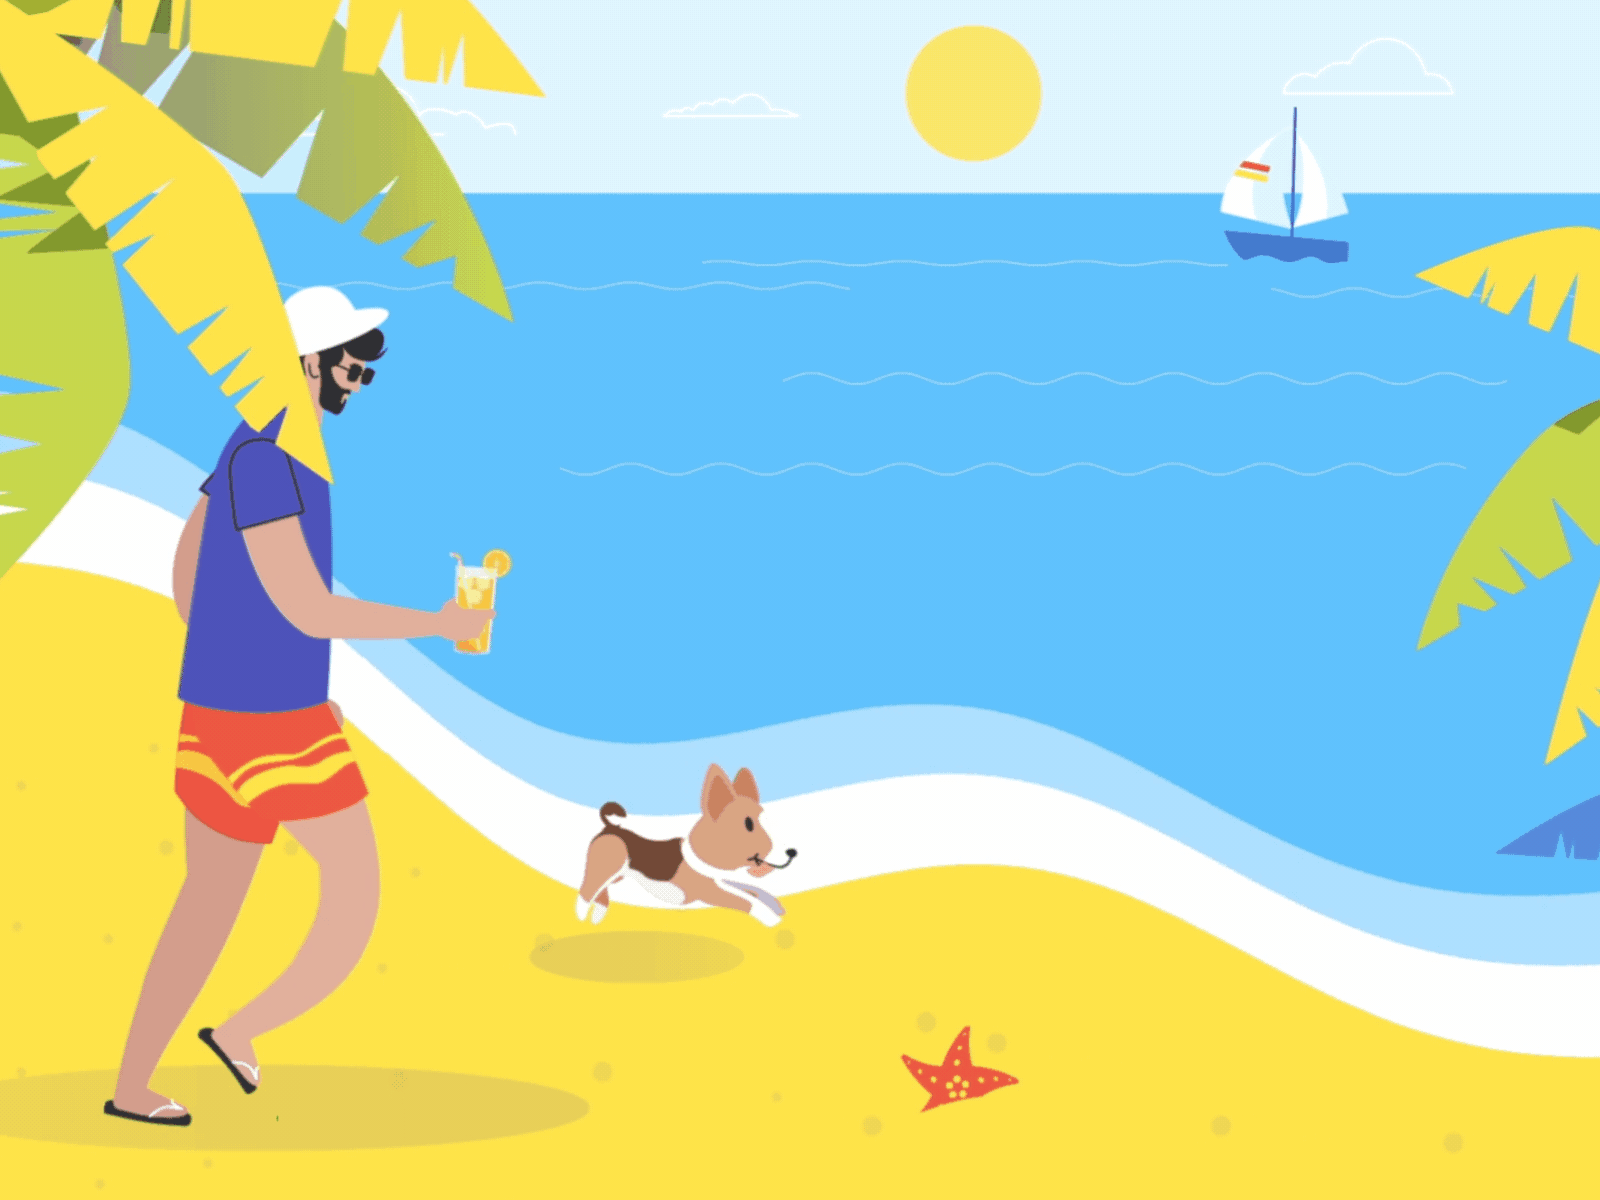 Walking At The Beach Animation by Dionis Railean on Dribbble